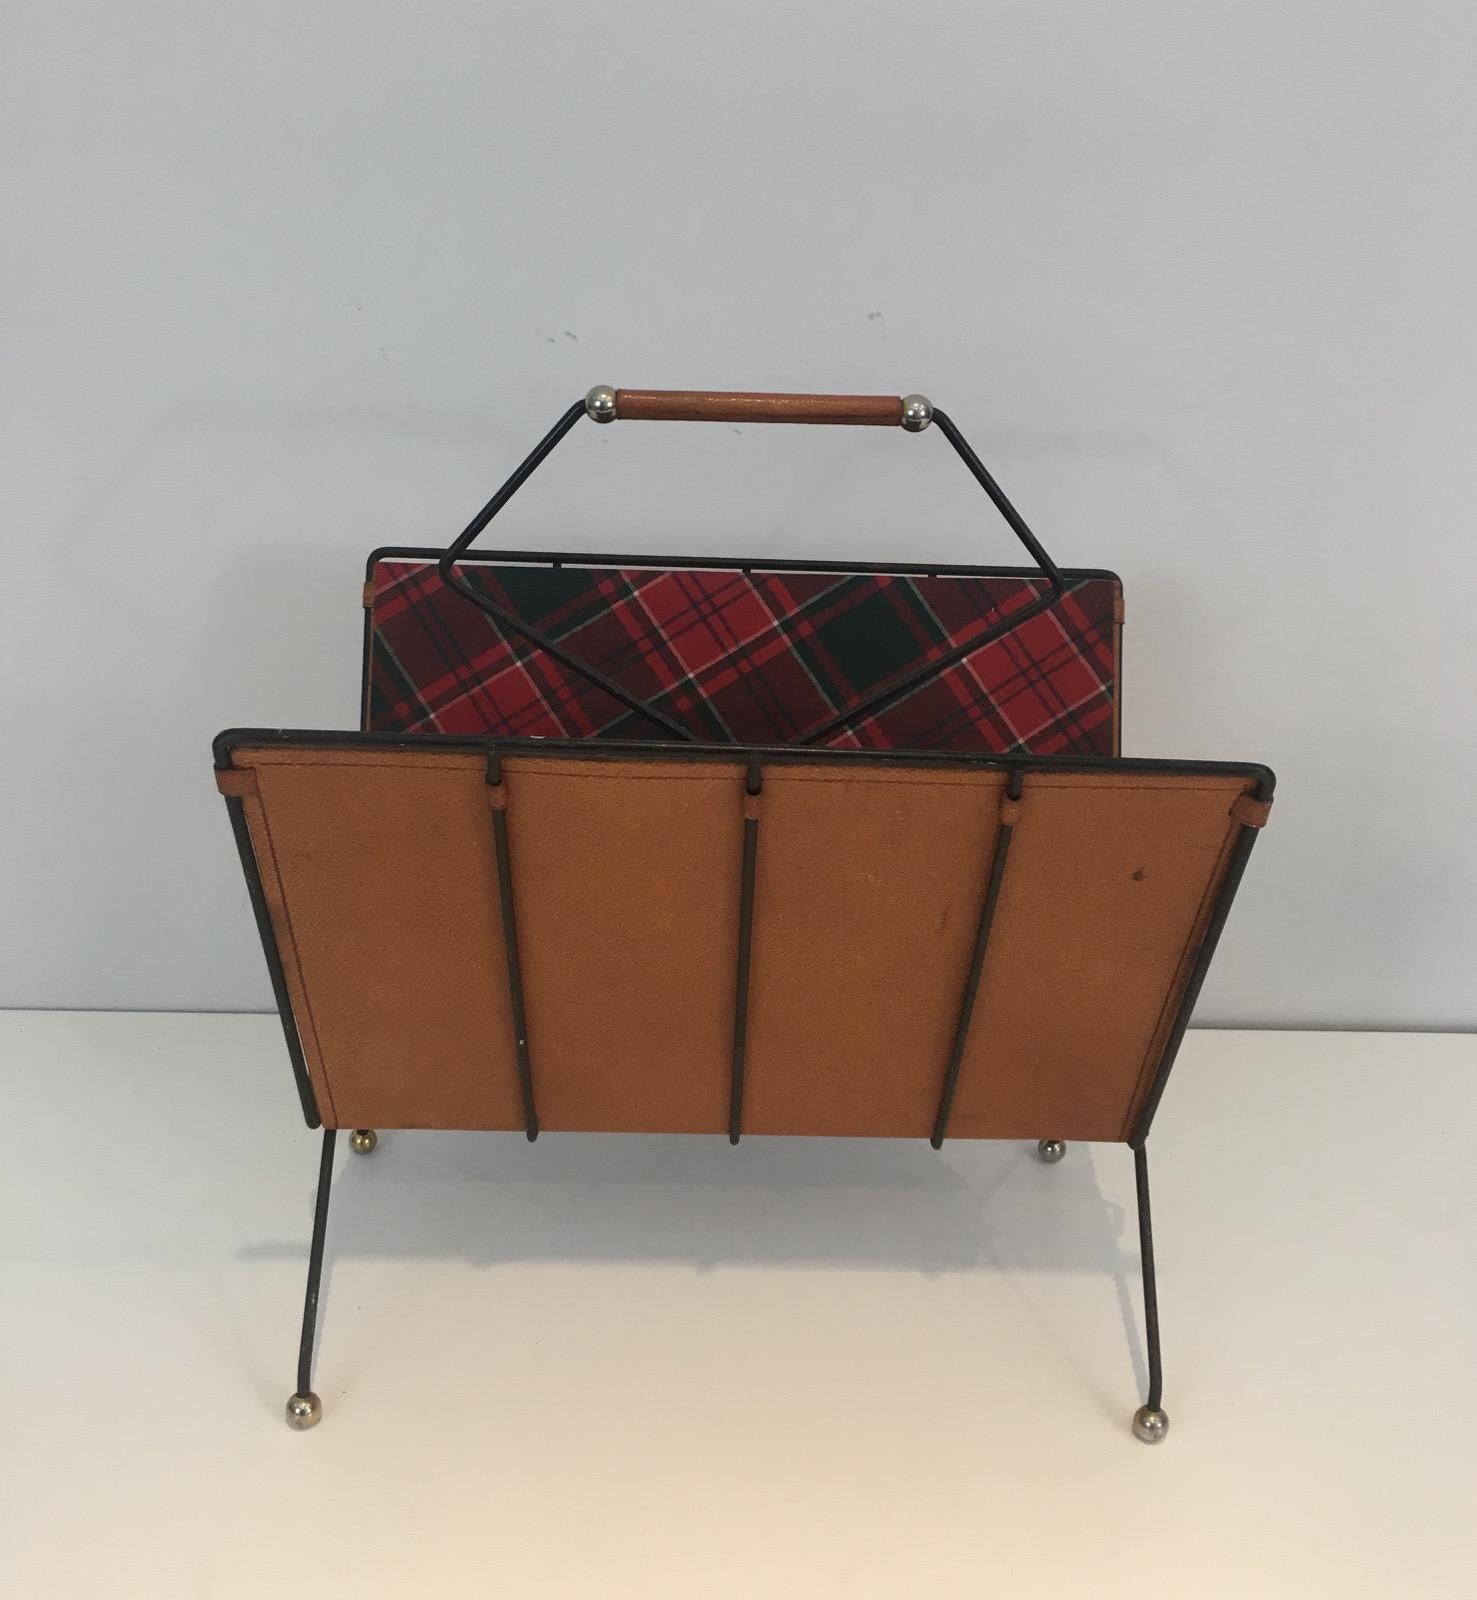 Rare Black Lacquered Metal, Leather and Plaid Fabric Magazine Rack For Sale 7